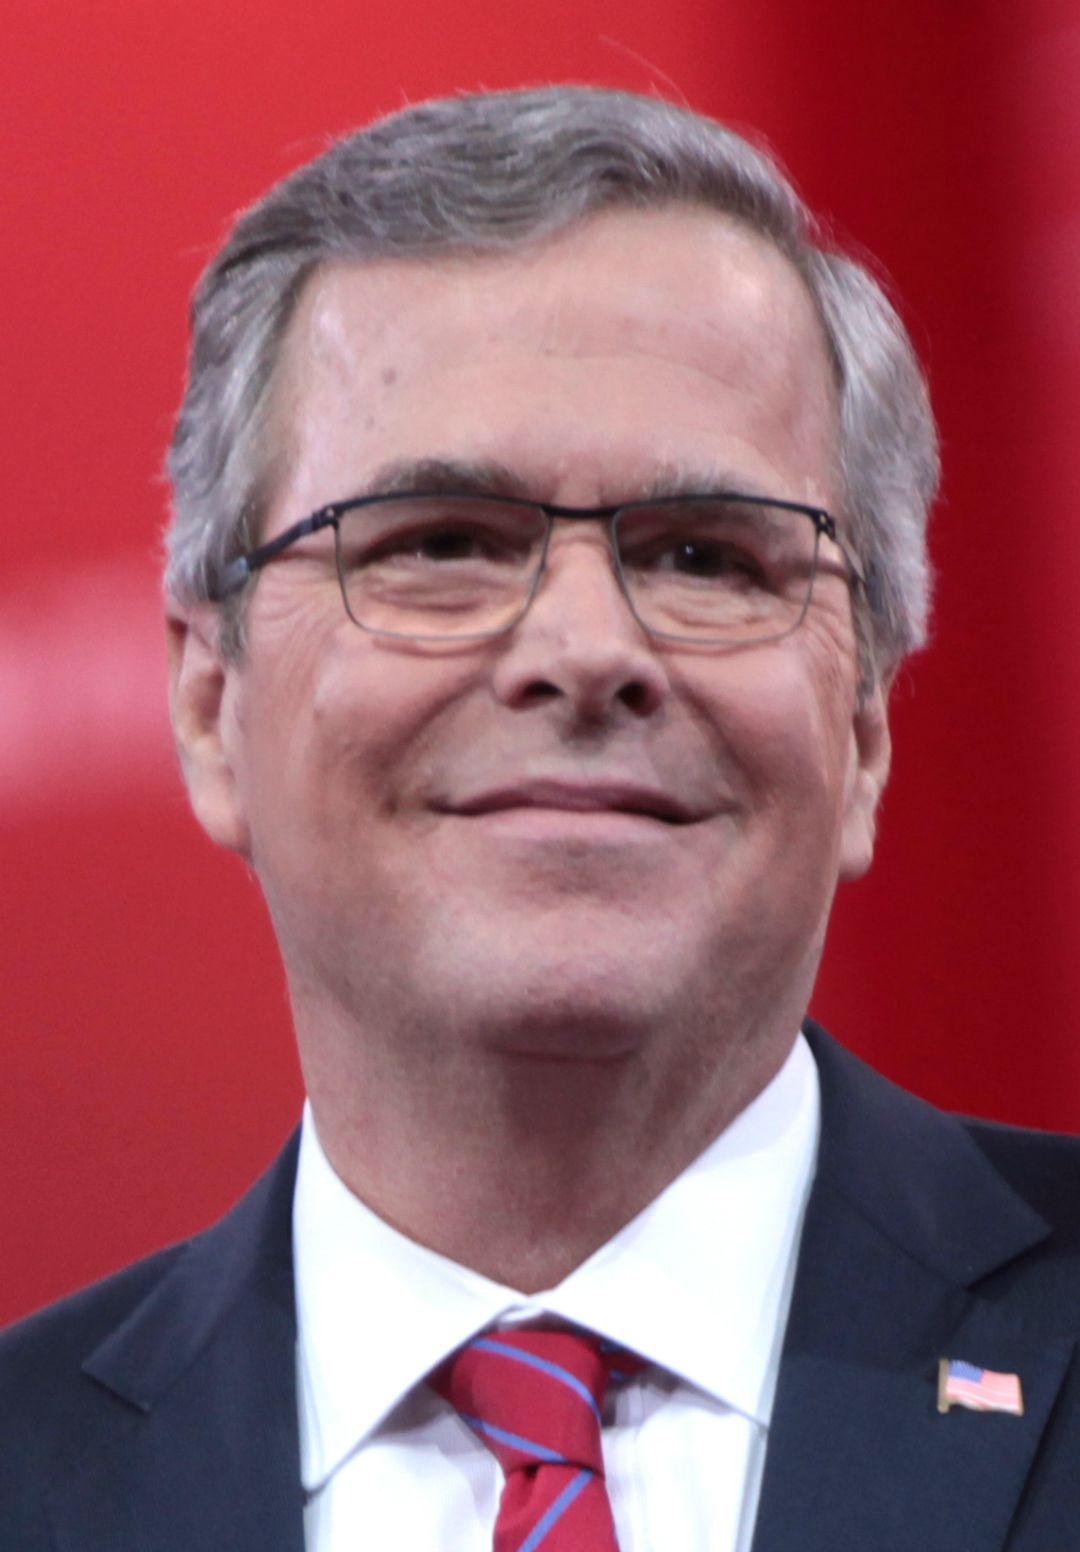 By Gage Skidmore from Peoria, AZ, United States of America (Jeb Bush) [CC BY-SA 2.0 (http://creativecommons.org/licenses/by-sa/2.0)], via Wikimedia Commons